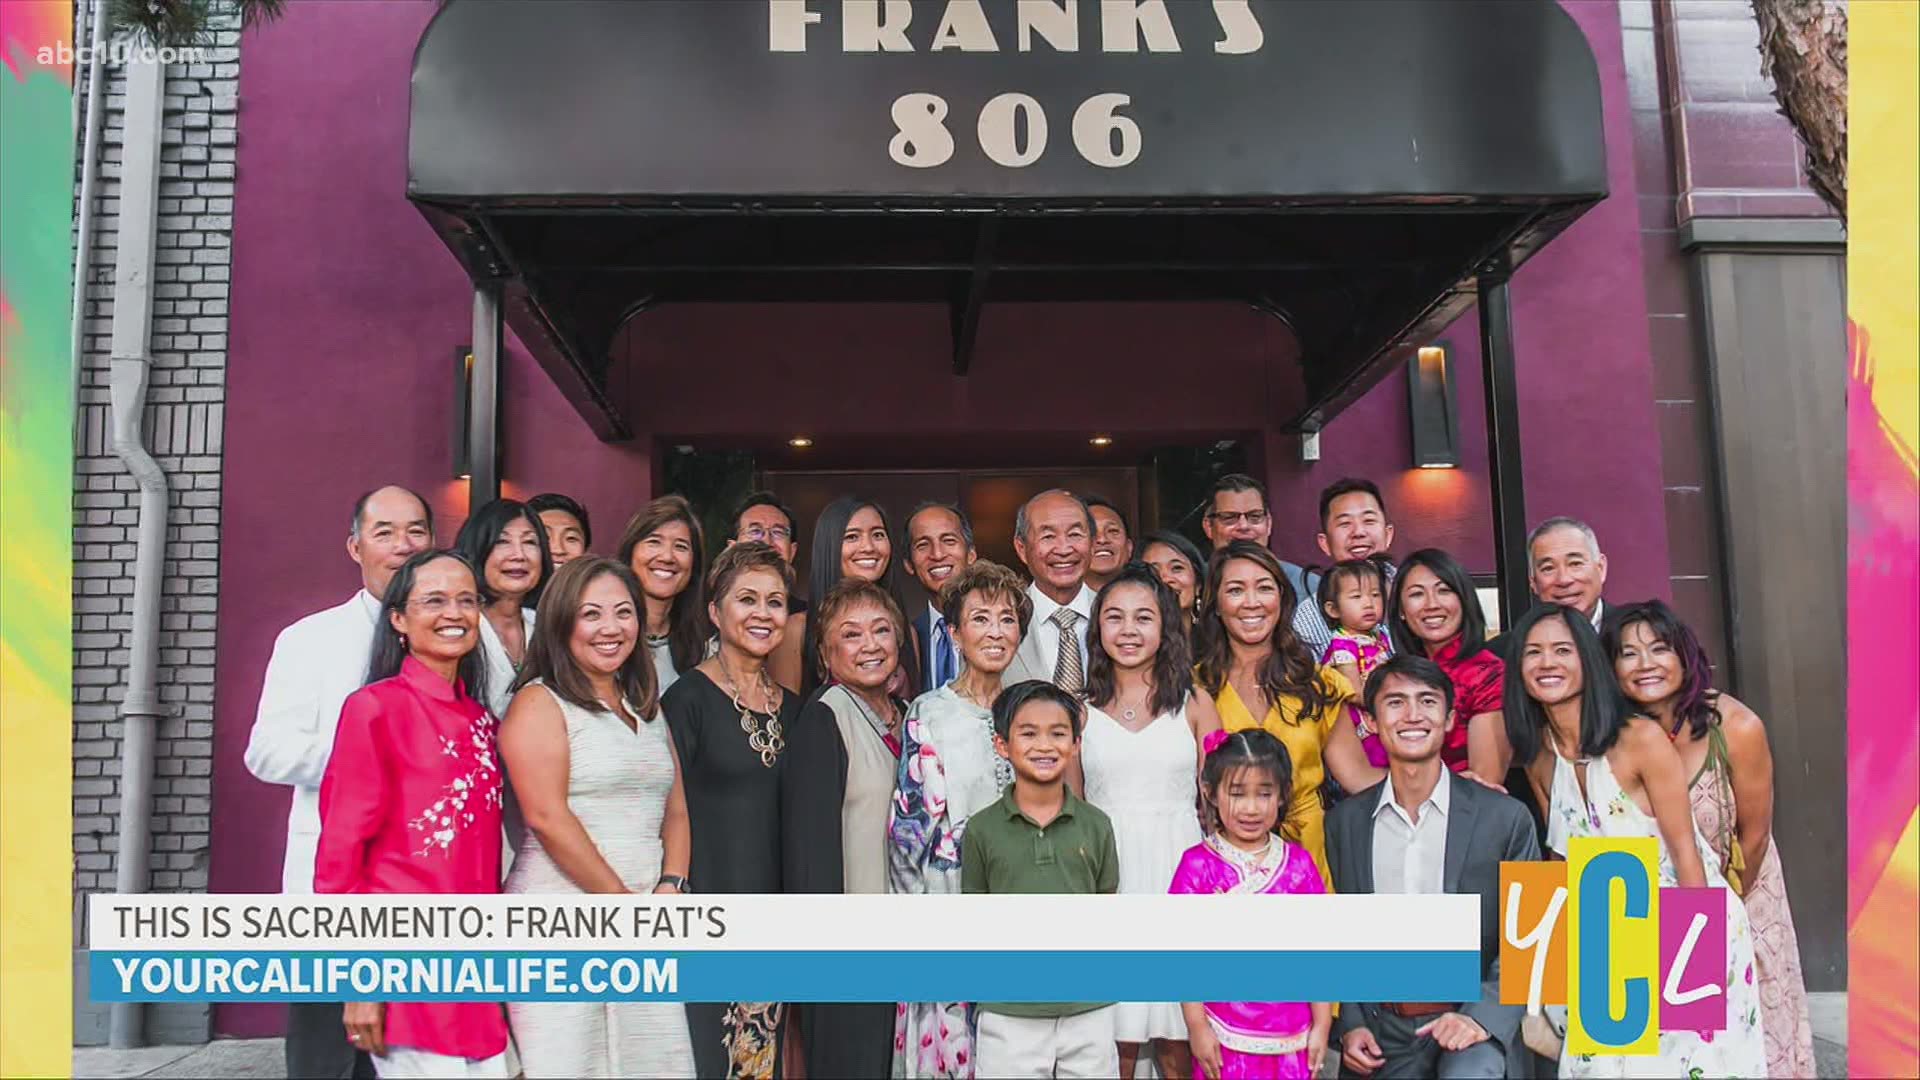 Kevin Fat joins us to talk about the history of Sacramento’s oldest family owned business, Frank Fat's, and how they’ve thrived throughout the years.